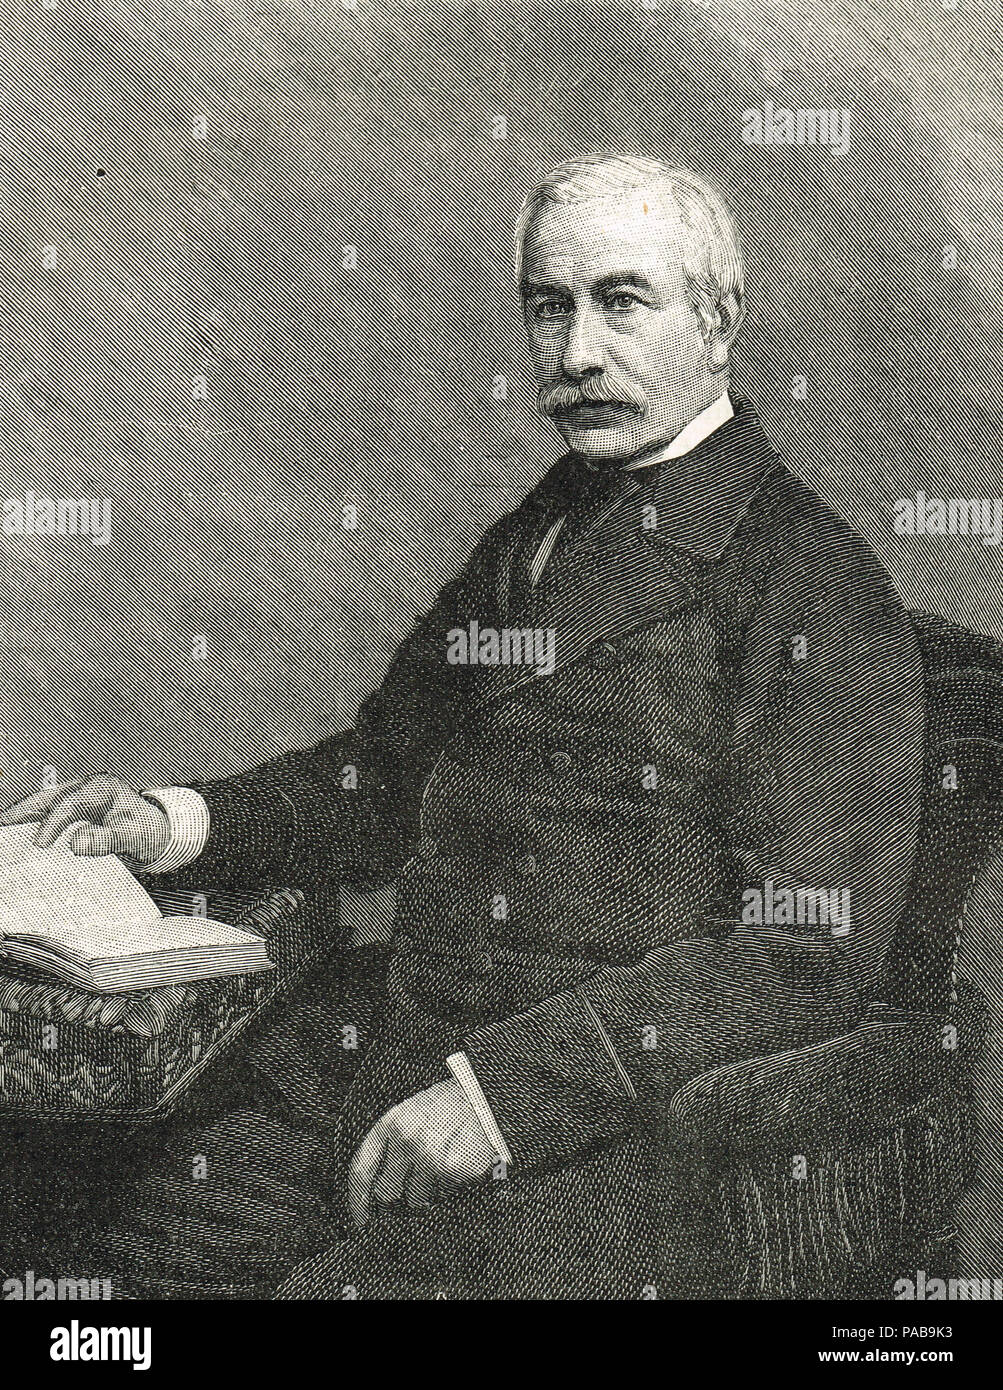 Sir Henry Bartle Edward Frere, 1° Baronet, British amministratore coloniale Foto Stock